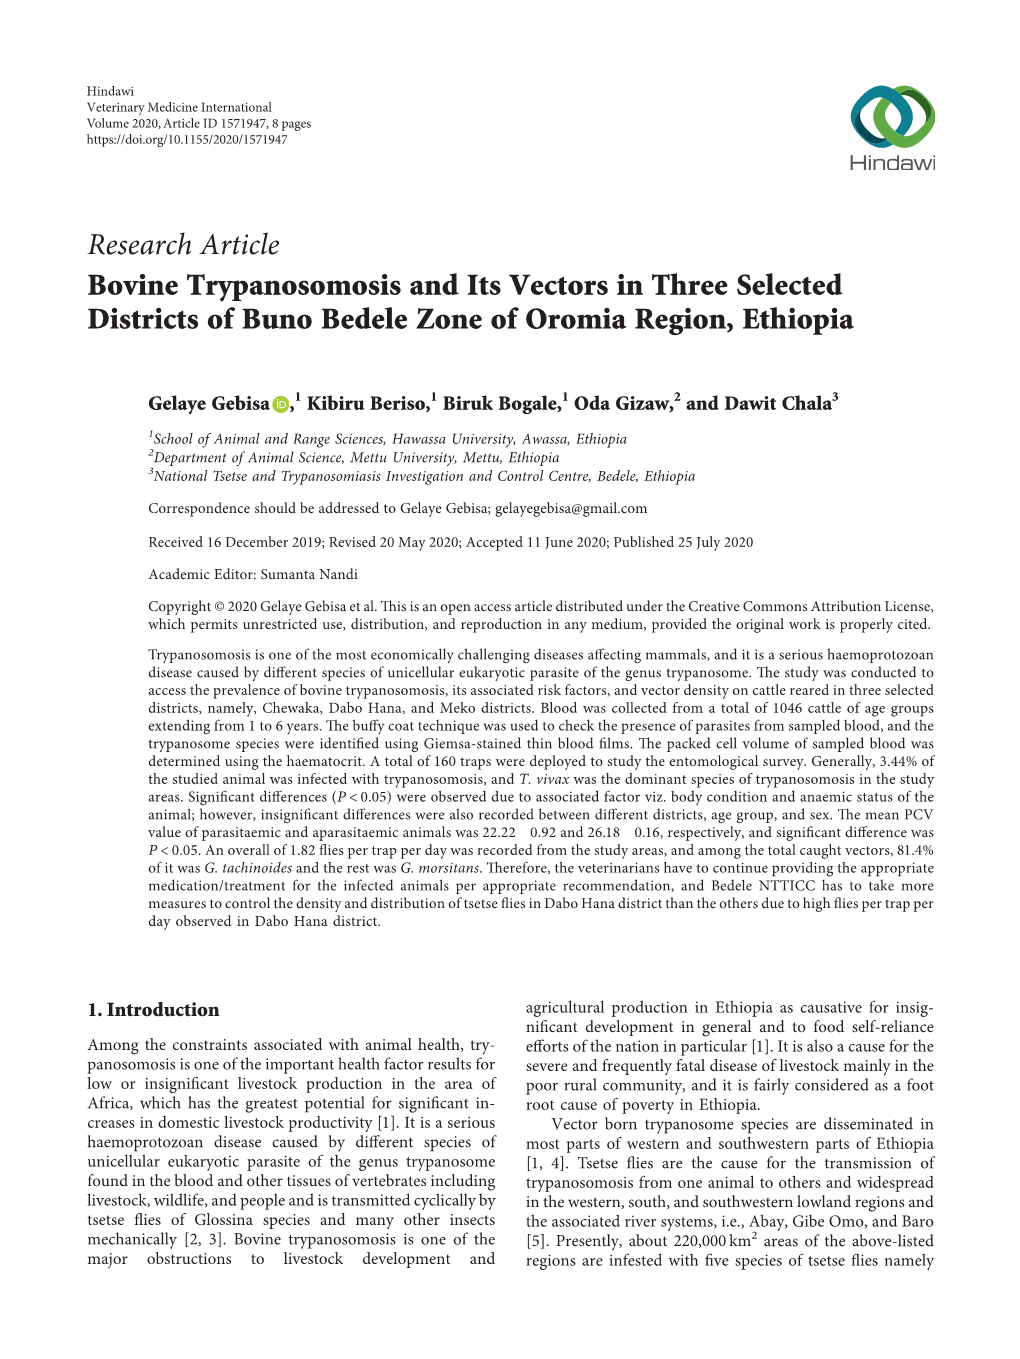 Bovine Trypanosomosis and Its Vectors in Three Selected Districts of Buno Bedele Zone of Oromia Region, Ethiopia